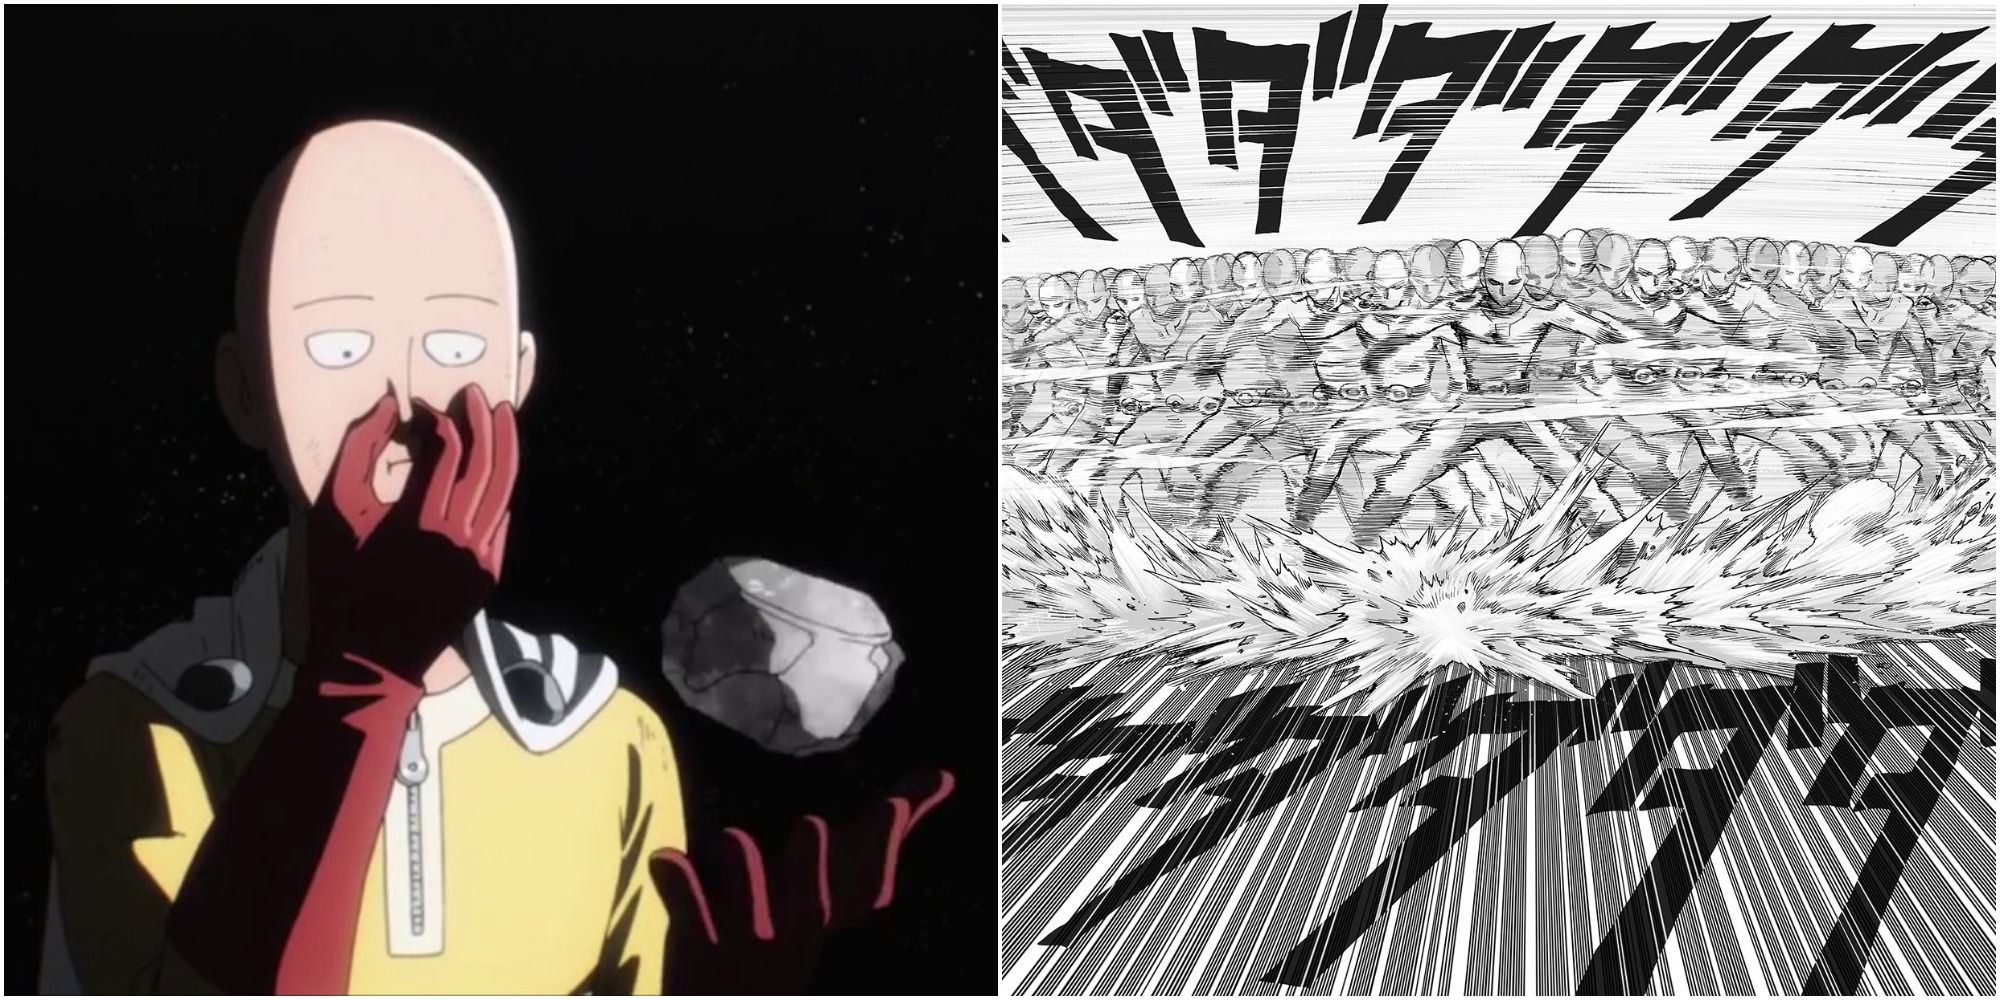 10. "Saitama" from One Punch Man - wide 1